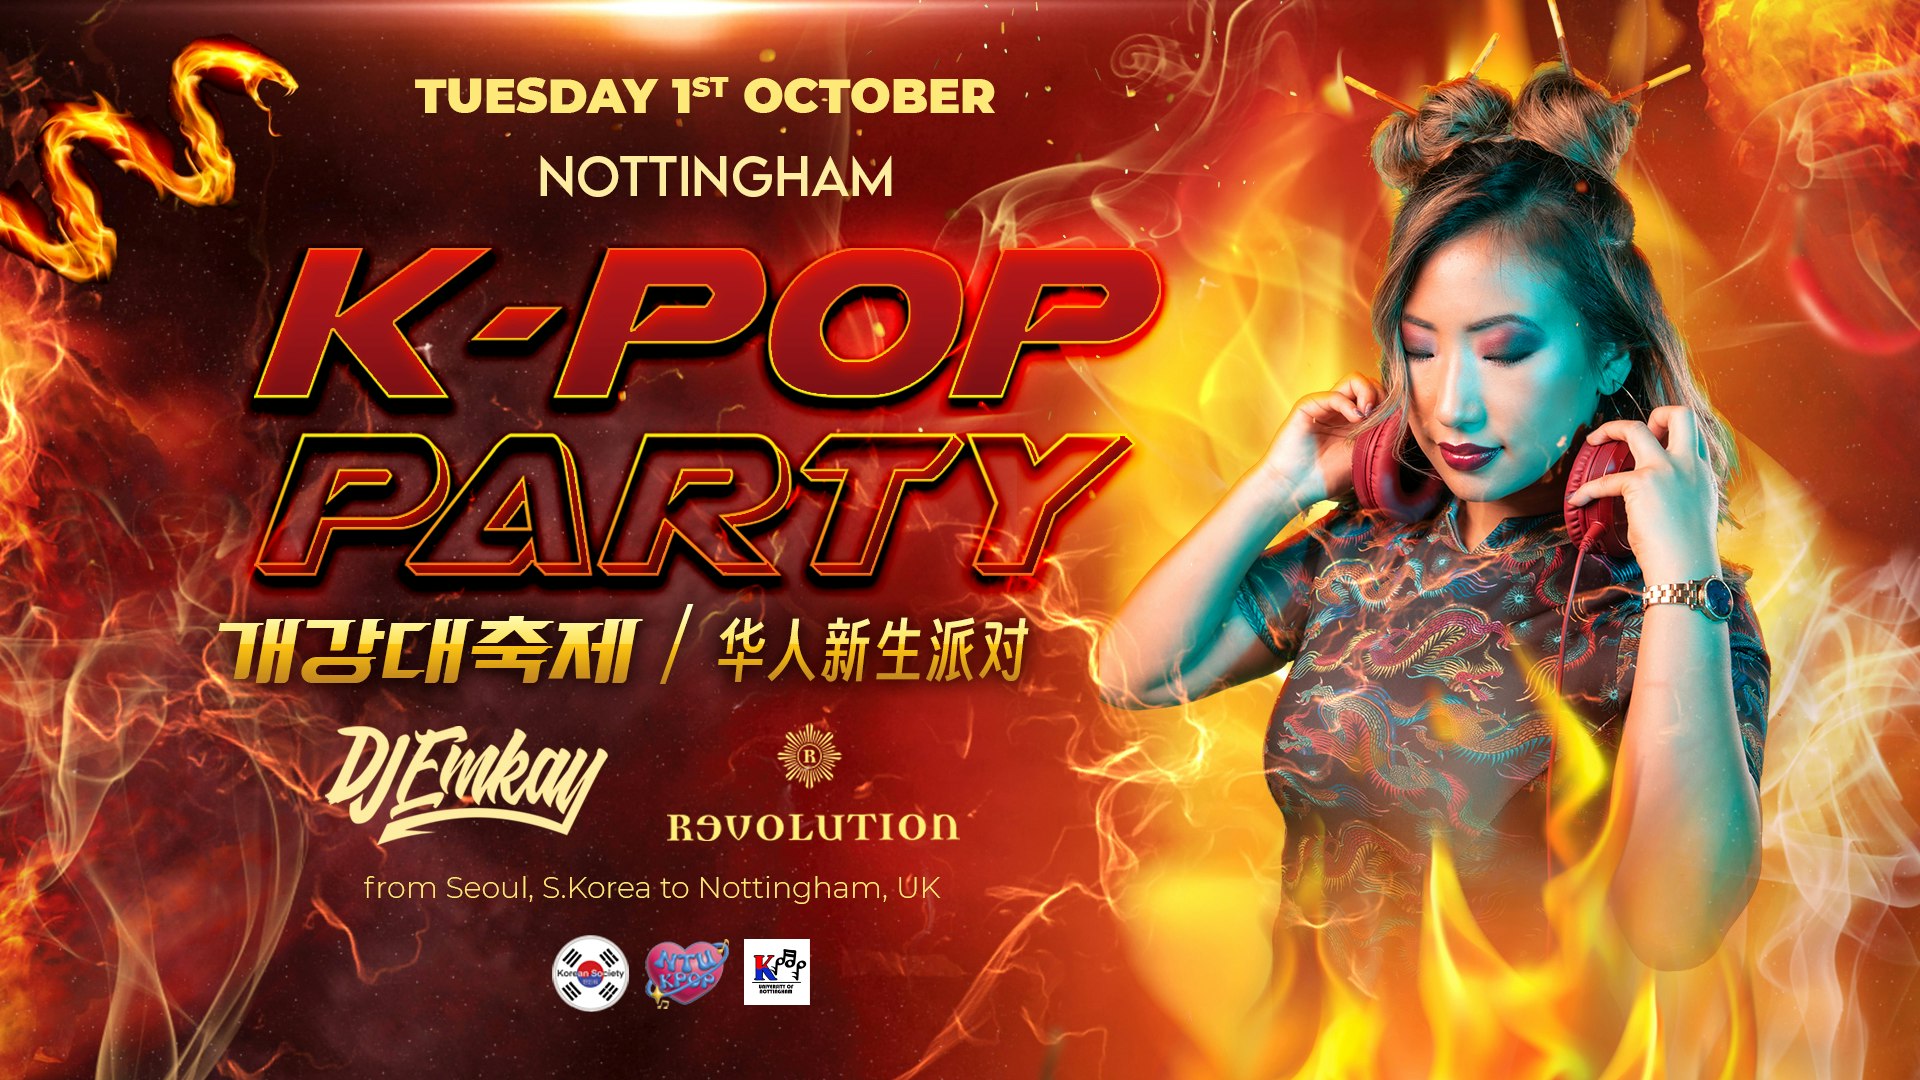 Nottingham K-Pop Party – Fire Tour with DJ EMKAY | Tuesday 1st October